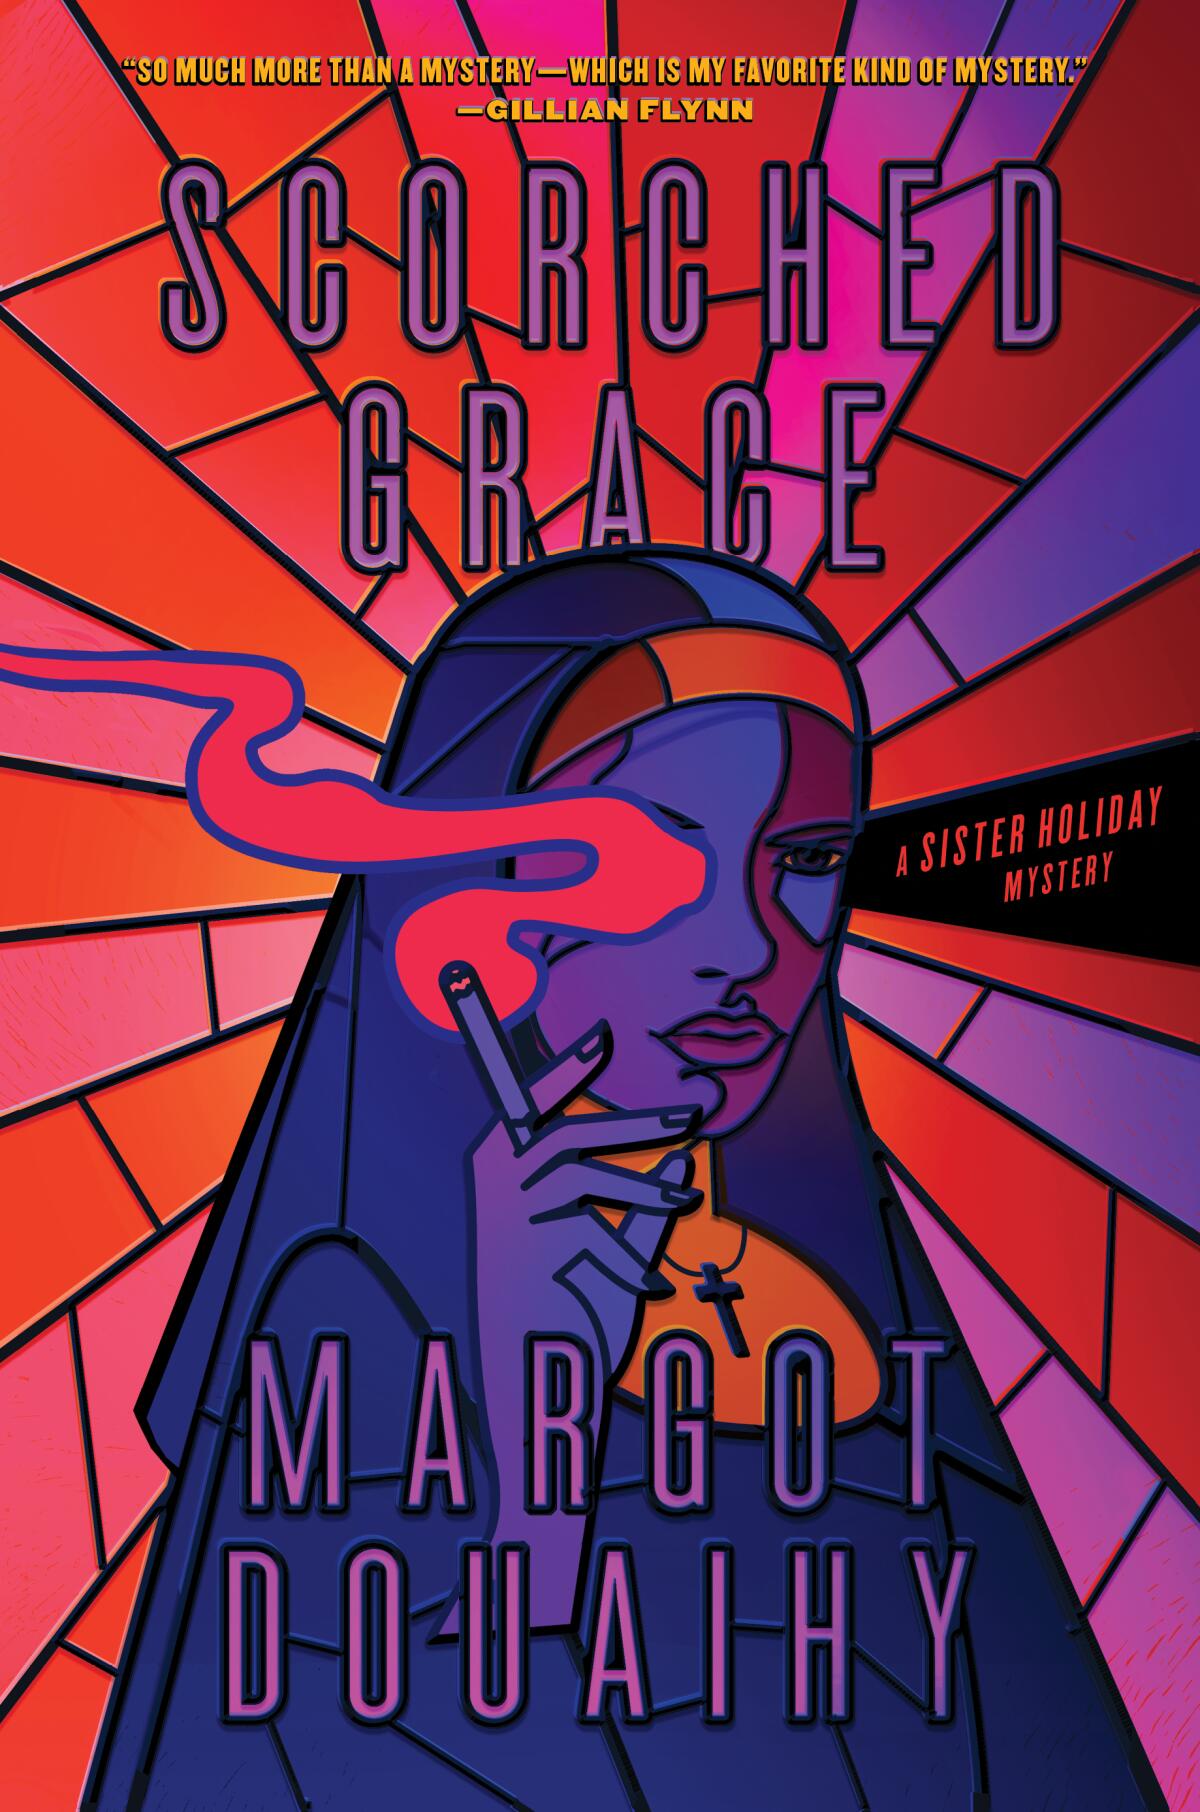 'Scorched Grace' book cover of a nun smoking a cigarette in a stylized stained-glass image